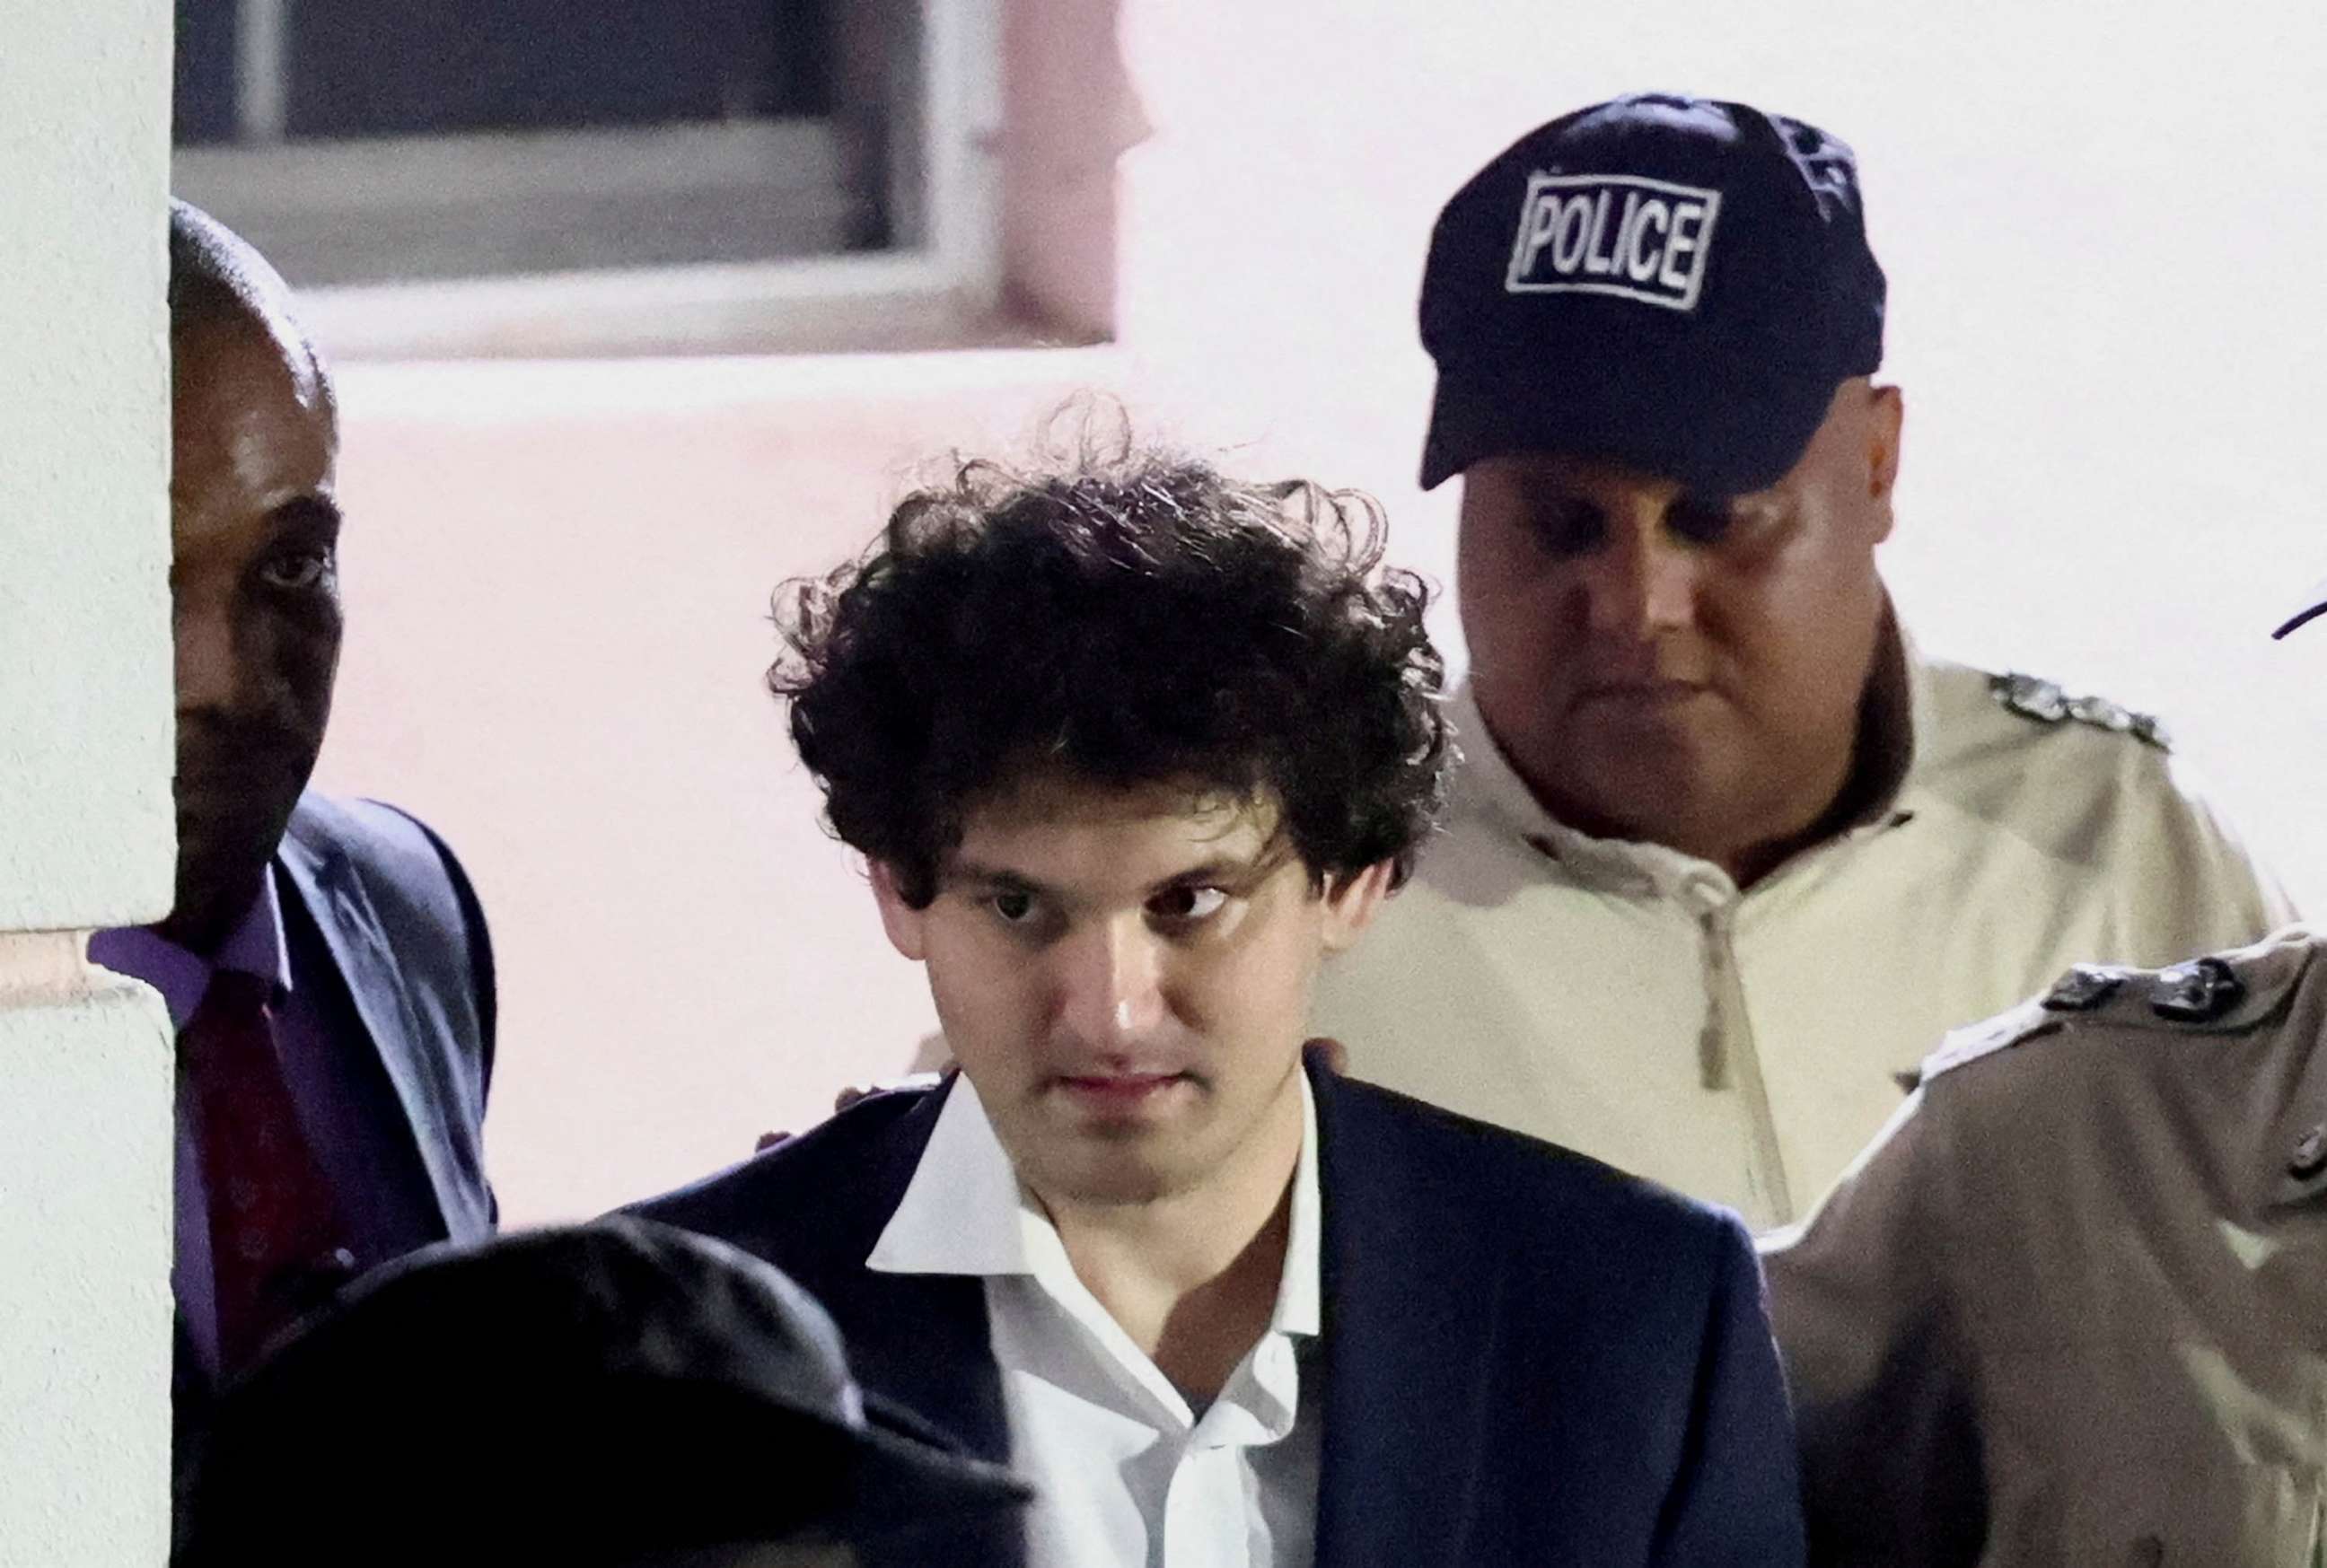 PHOTO: FILE - Sam Bankman-Fried, who founded and led FTX until a liquidity crunch forced the cryptocurrency exchange to declare bankruptcy, is escorted out of the Magistrate Court building after his arrest in Nassau, Bahamas, Dec. 13, 2022.